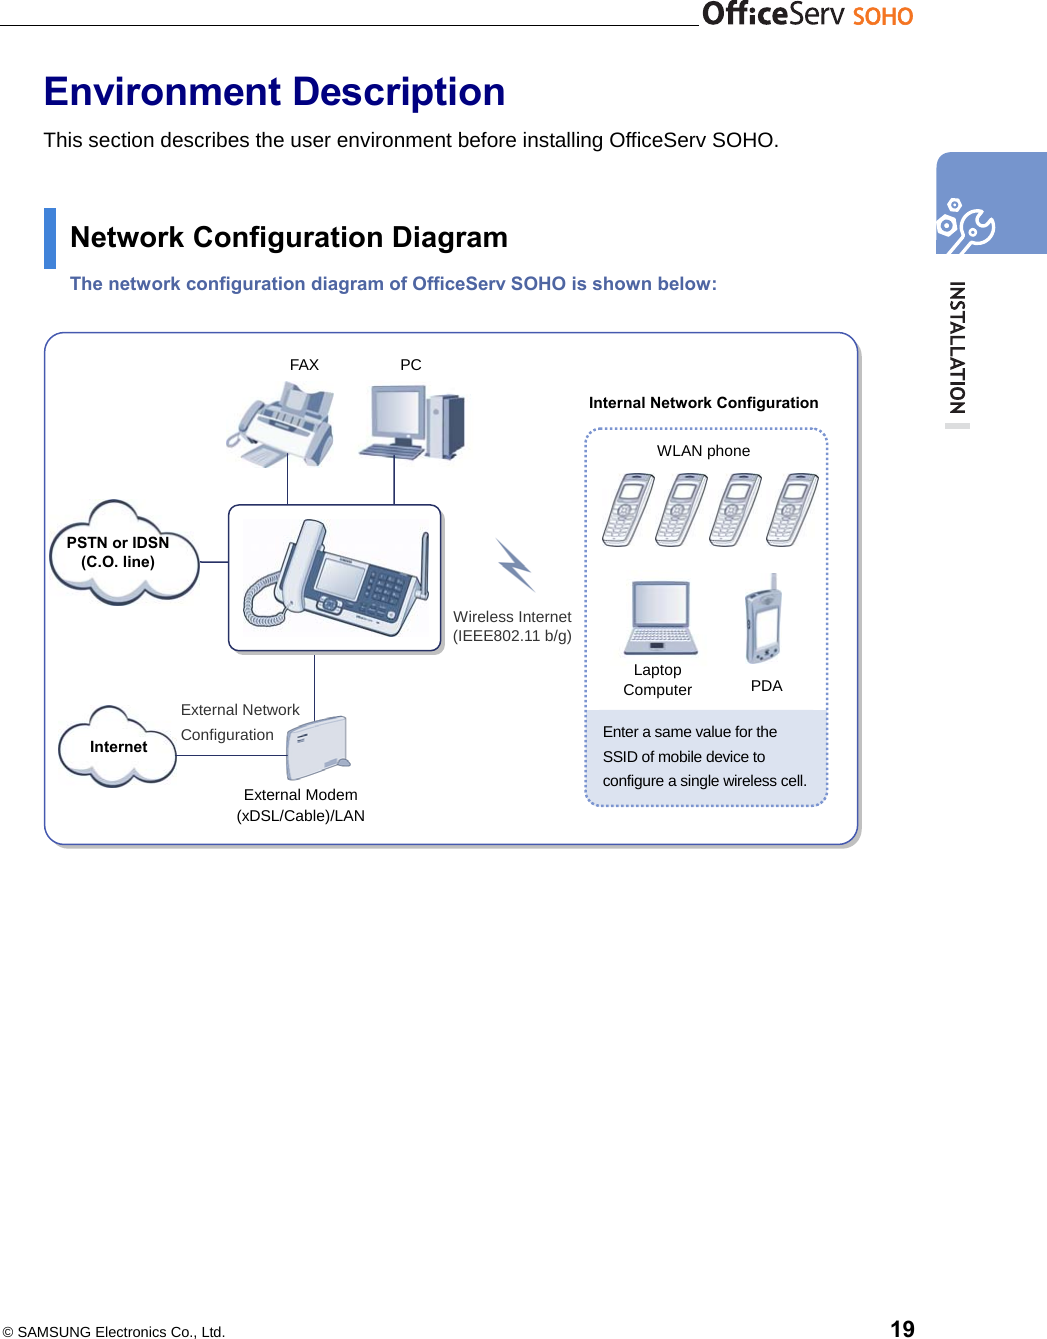    © SAMSUNG Electronics Co., Ltd.    19 Environment Description This section describes the user environment before installing OfficeServ SOHO.  Network Configuration Diagram The network configuration diagram of OfficeServ SOHO is shown below:     WLAN phone External Modem (xDSL/Cable)/LAN Internal Network Configuration PSTN or IDSN (C.O. line) Internet External Network Configuration PC Laptop ComputerWireless Internet (IEEE802.11 b/g) Enter a same value for the SSID of mobile device to configure a single wireless cell. FAX PDA 